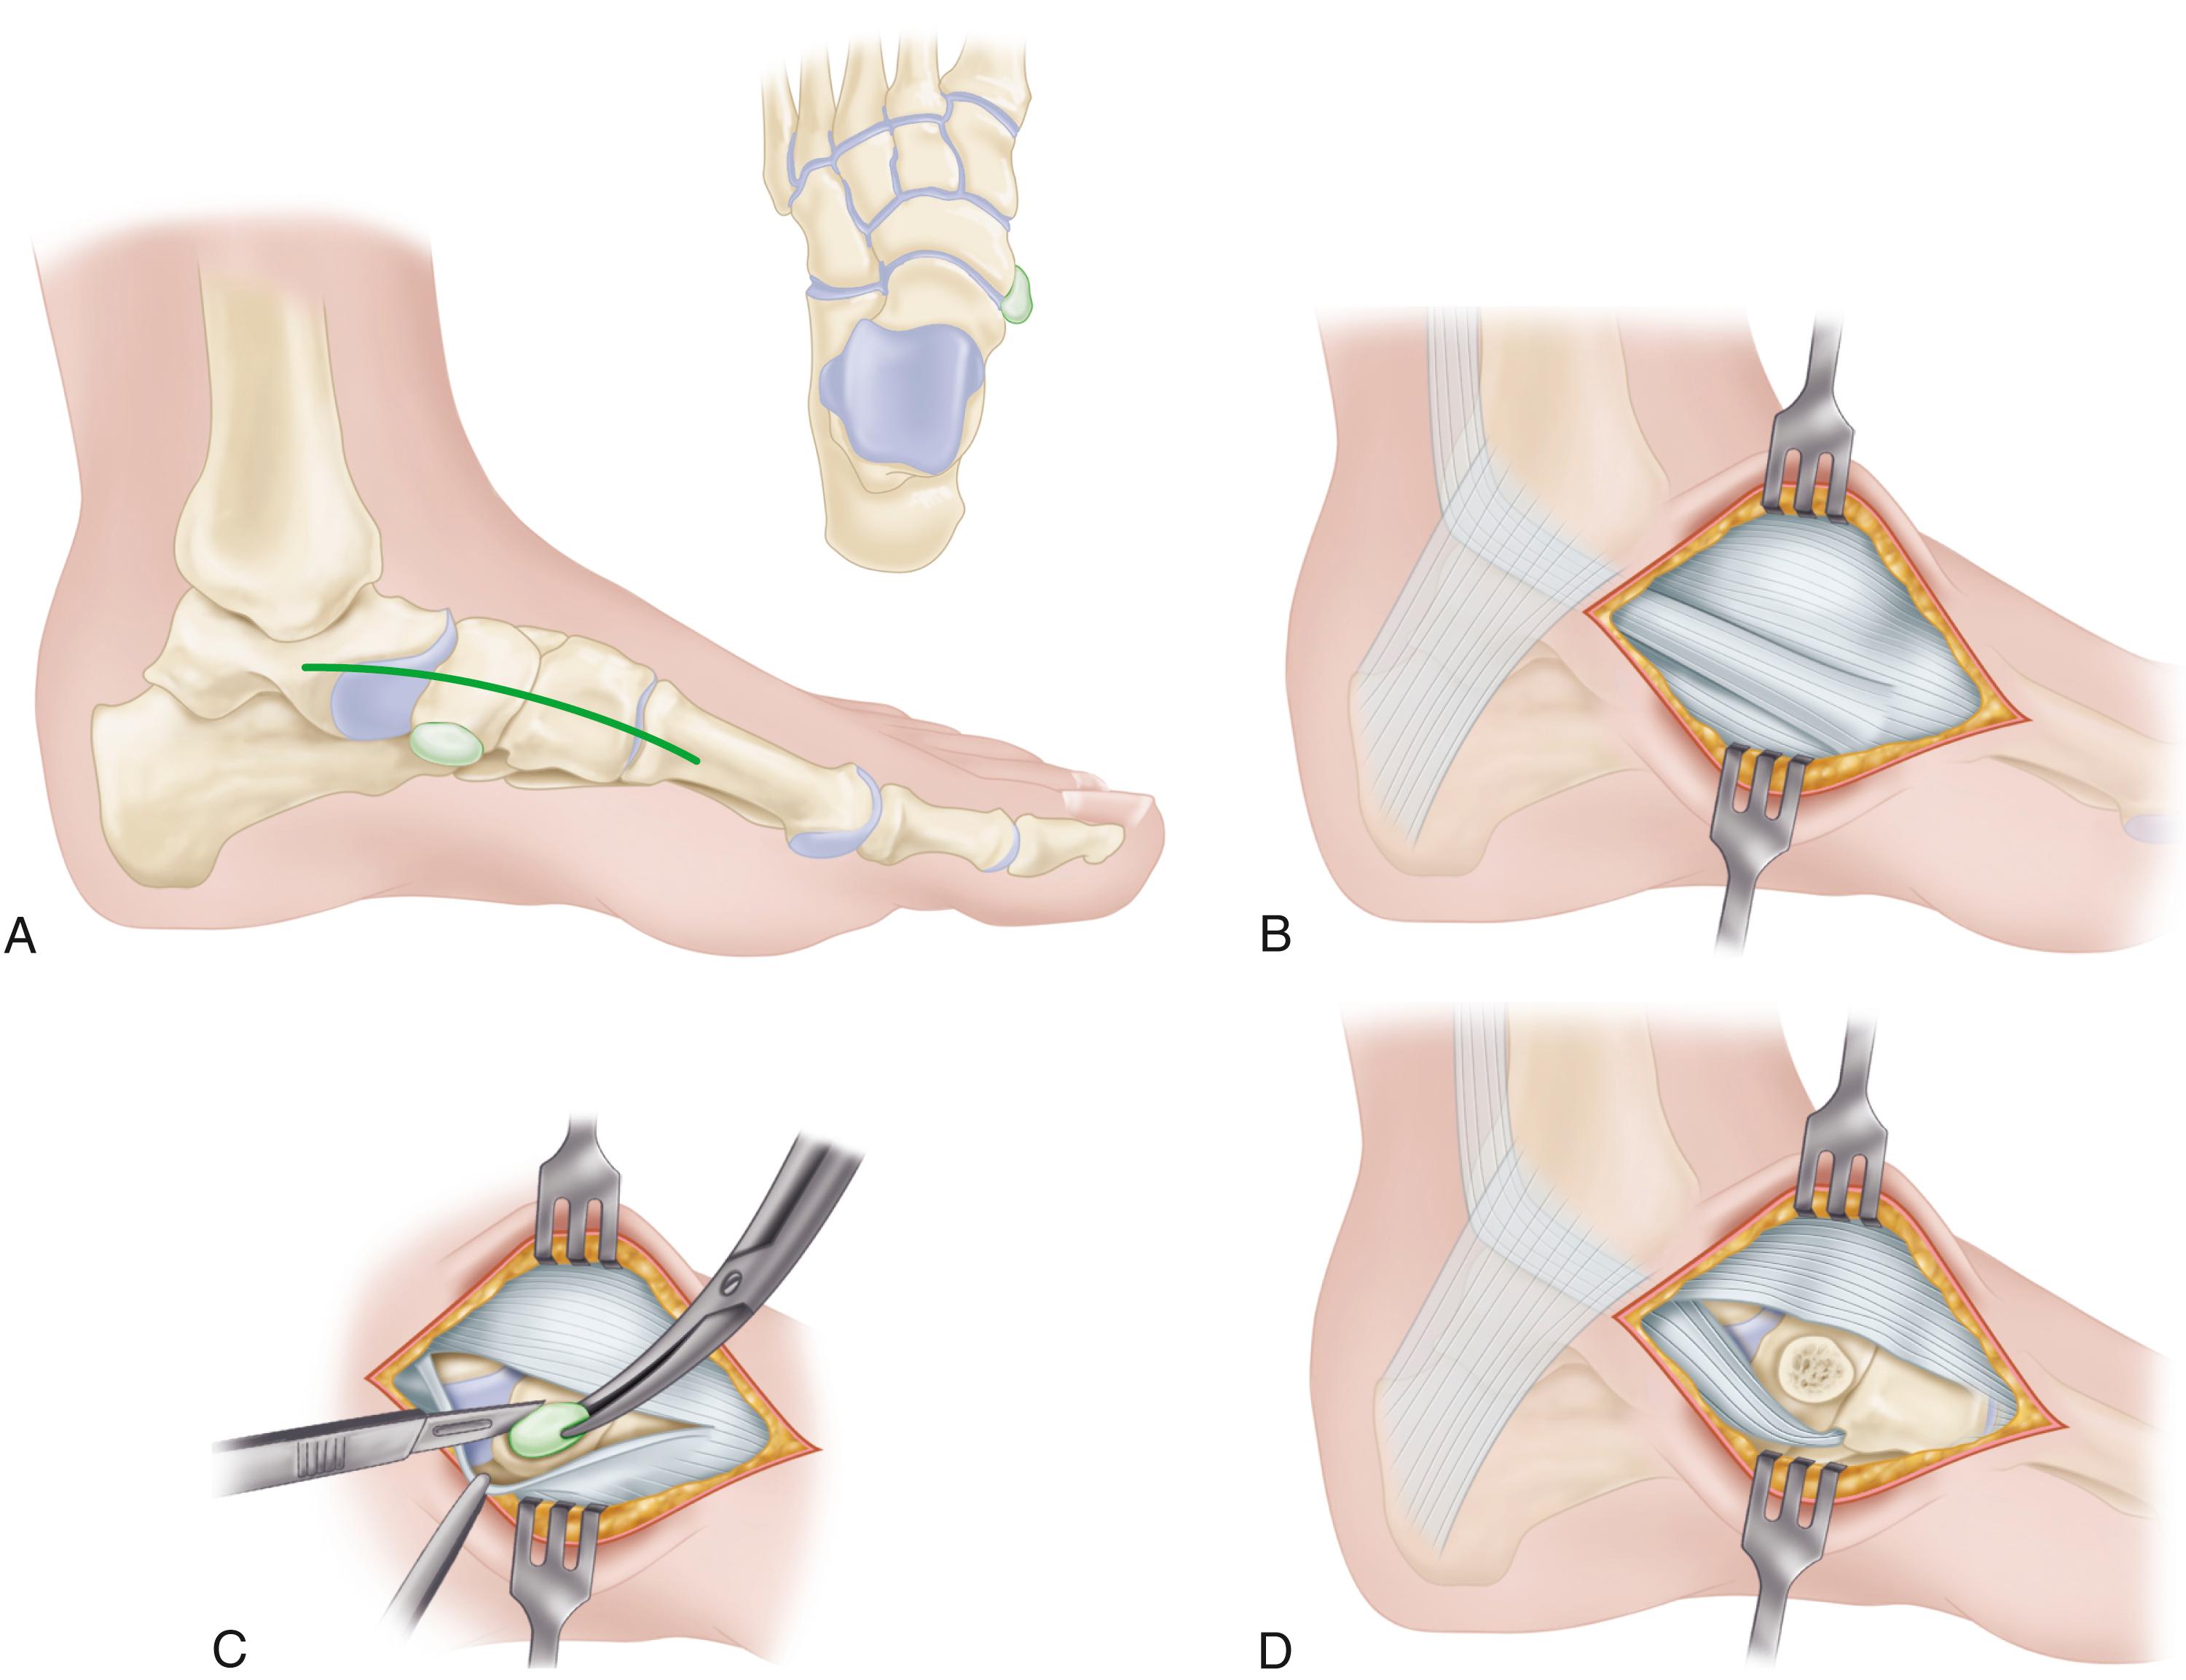 FIGURE 83.42, Kidner procedure. A, Incision. Inset , Location of accessory navicular. B, Exposure of posterior tibial tendon and accessory navicular. C, Removal of accessory navicular. D, Accessory navicular removed and tuberosity of navicular cut flush with adjacent cuneiform and talus. SEE TECHNIQUE 83.11.